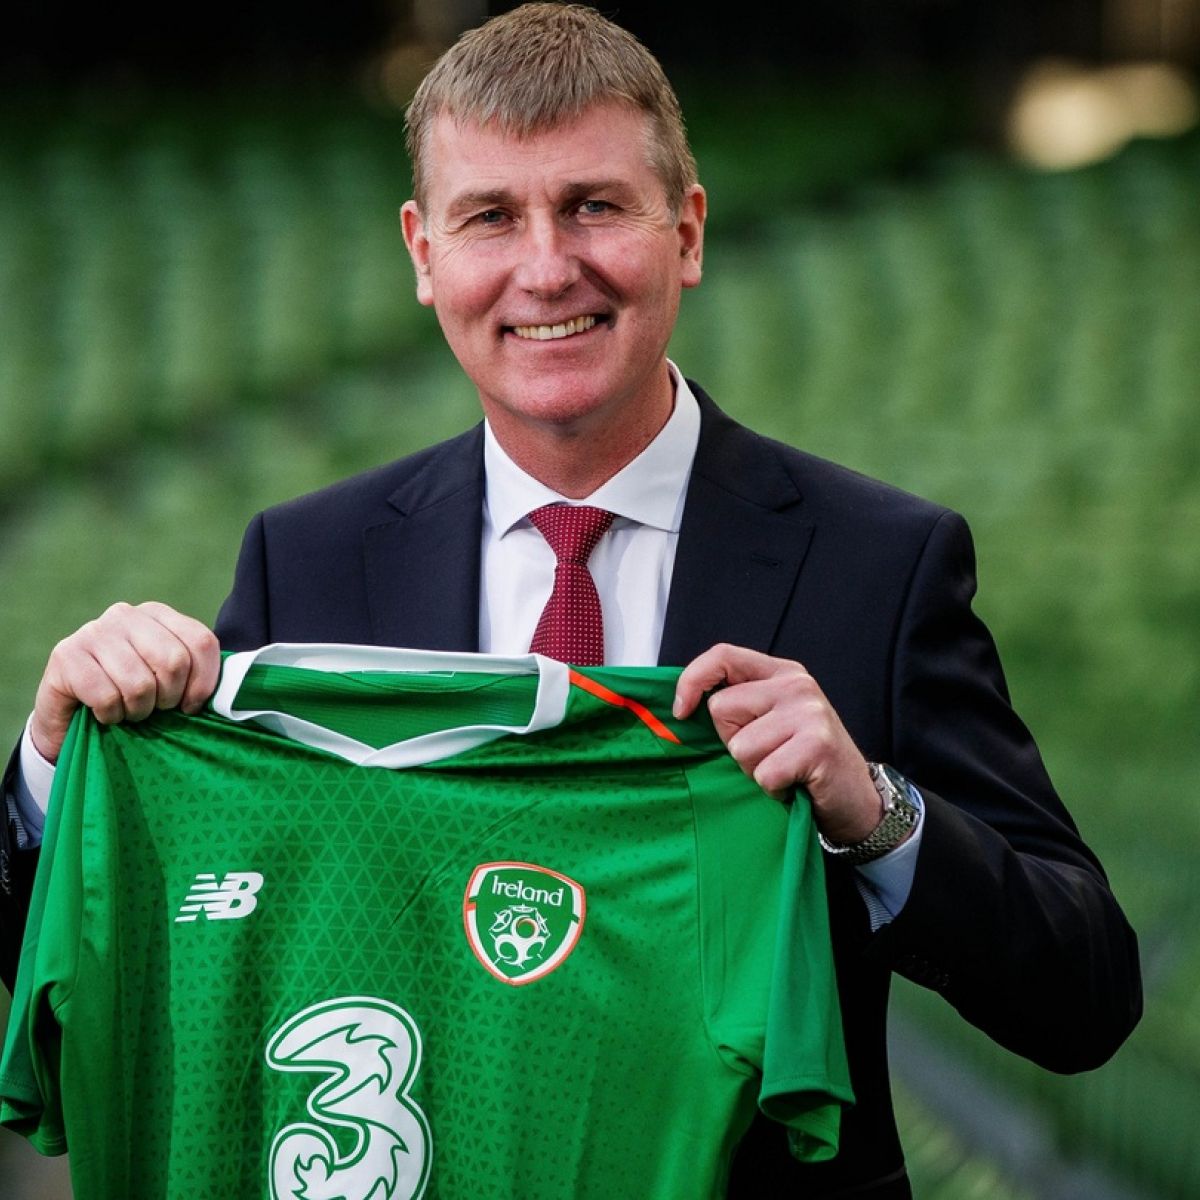 After winning 3 consecutive league titles and the historic Europa League victory in 2016, Kenny was offered a position as Republic of Ireland Under 21 manager before the 2018 season. He has since risen to senior team manager. [10/x]